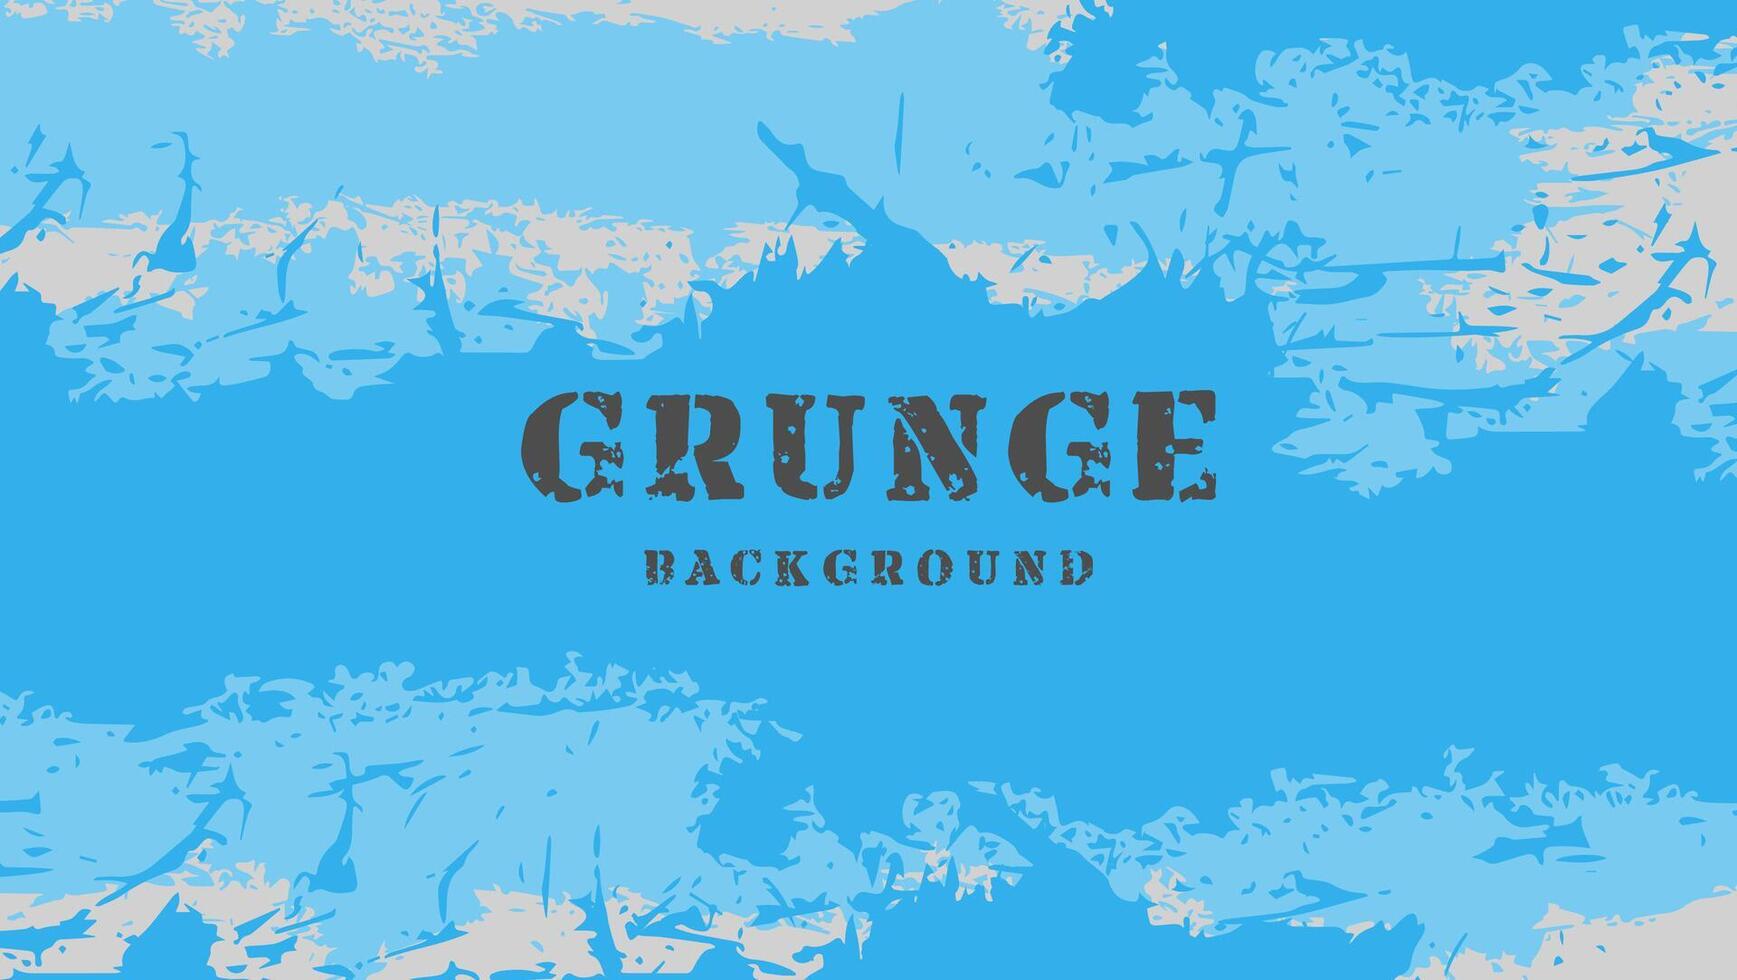 Abstract Grunge Blue Texture Background Design vector